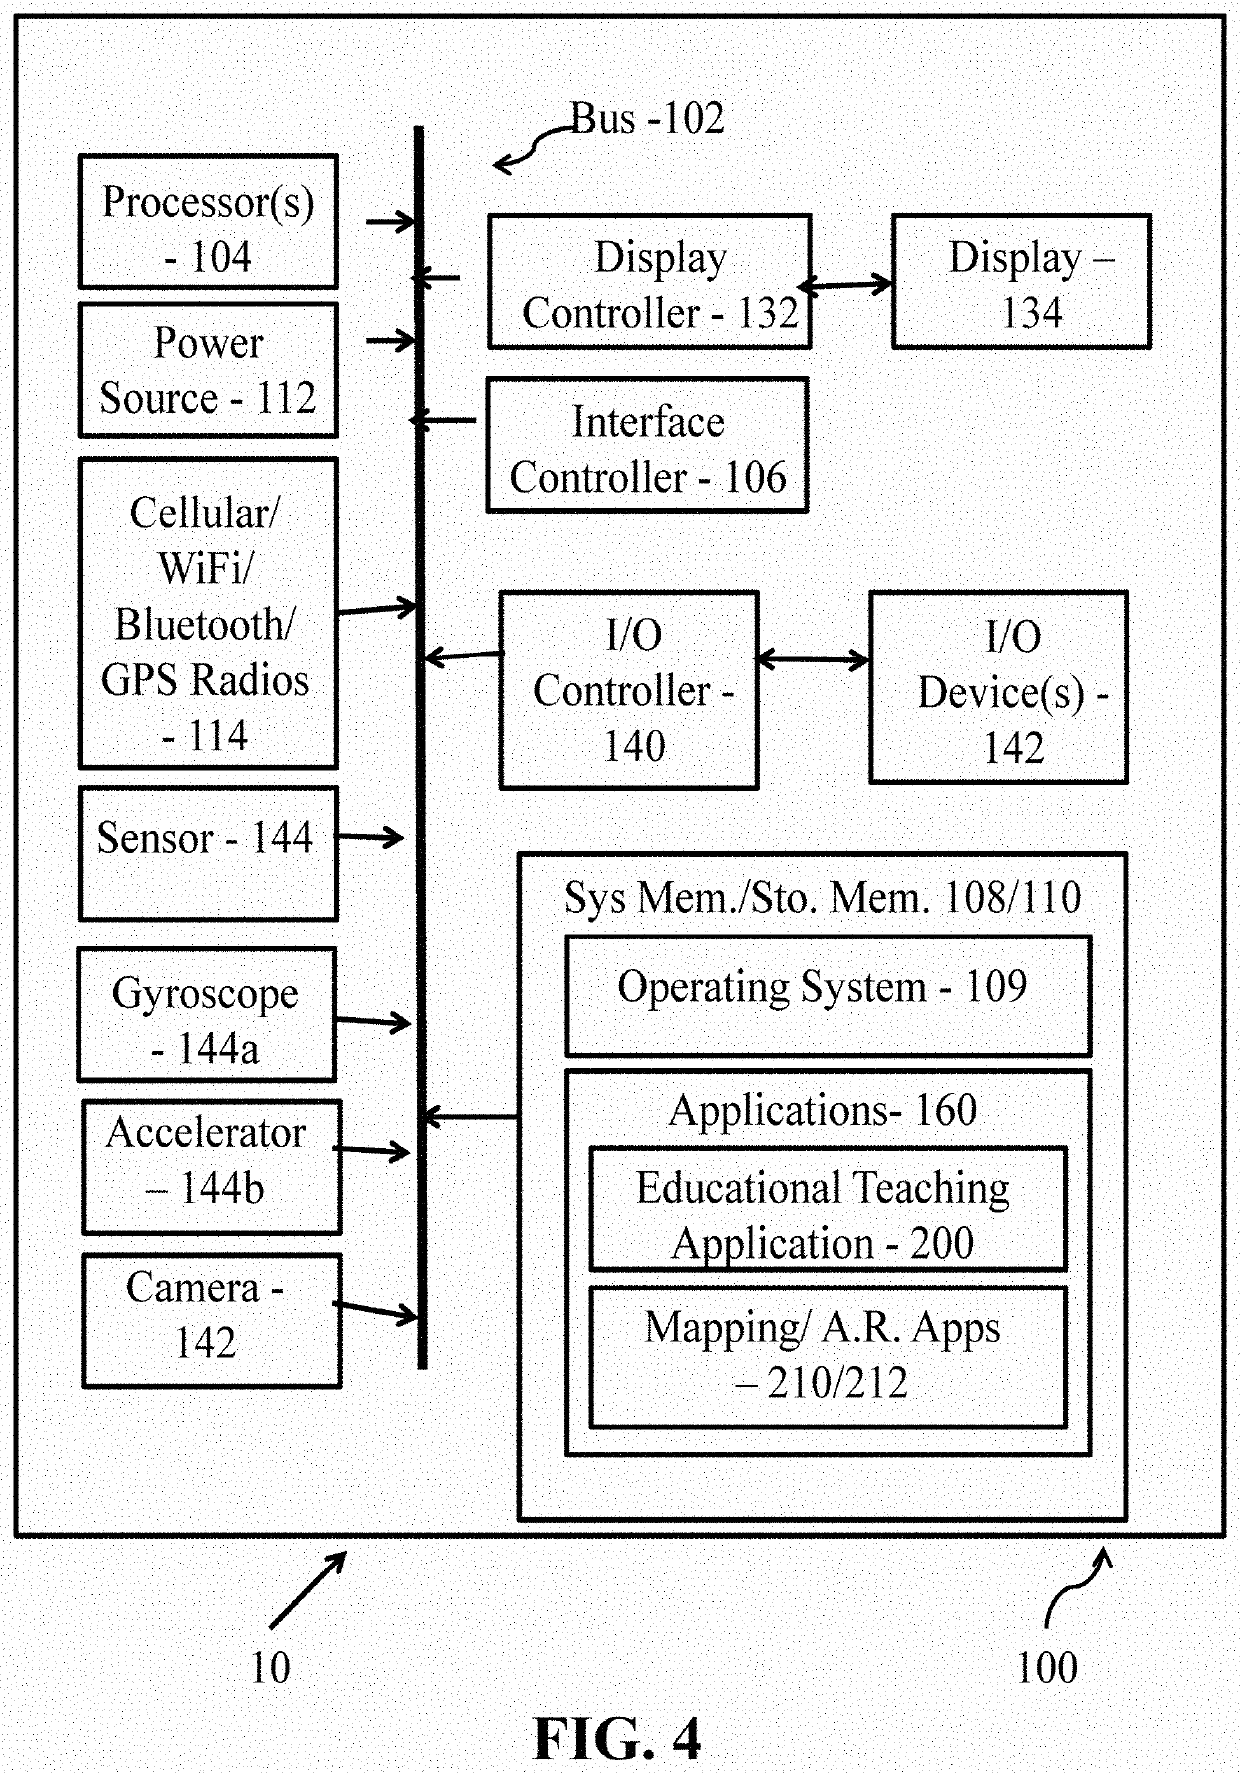 System and Method for Improving Reading Skills of Users with Reading Disability Symptoms